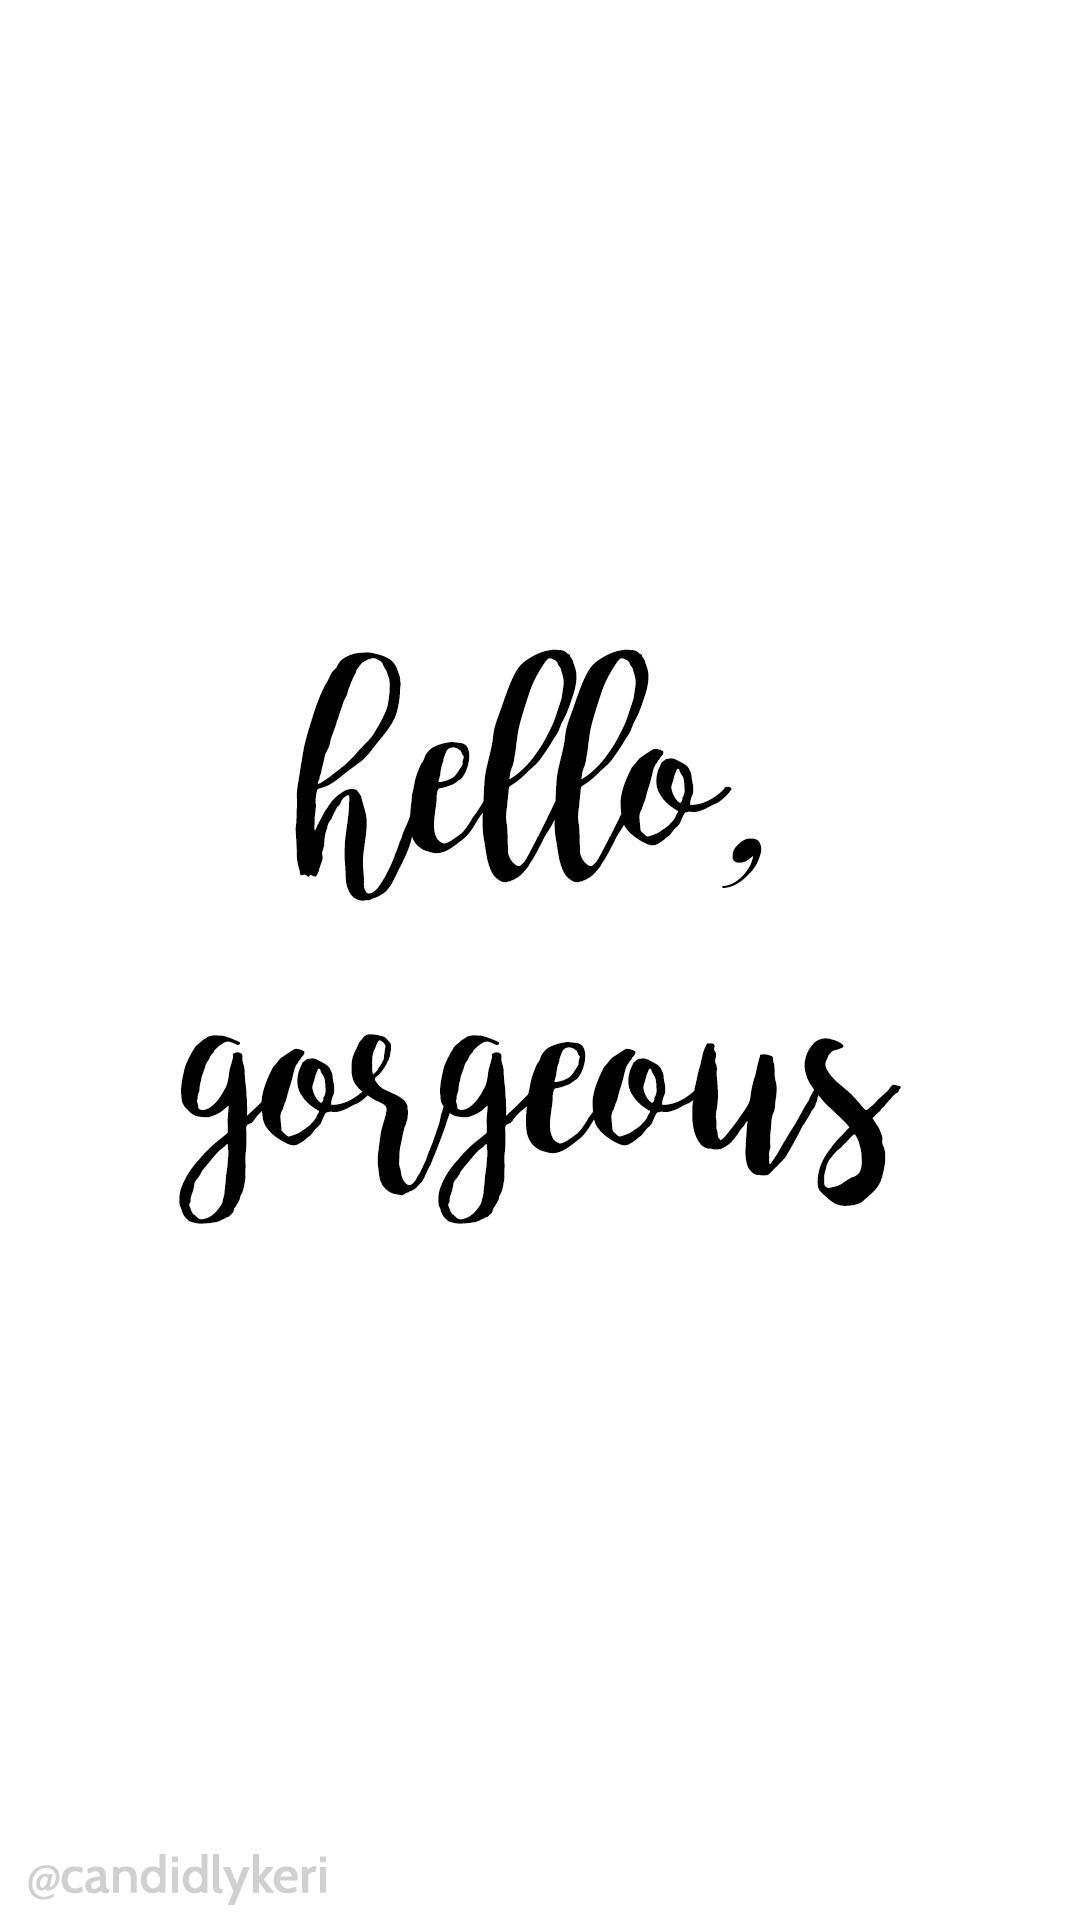 1080x1920 Hello Gorgeous simple script black and white wallpaper background iphone,  android, desktop for free